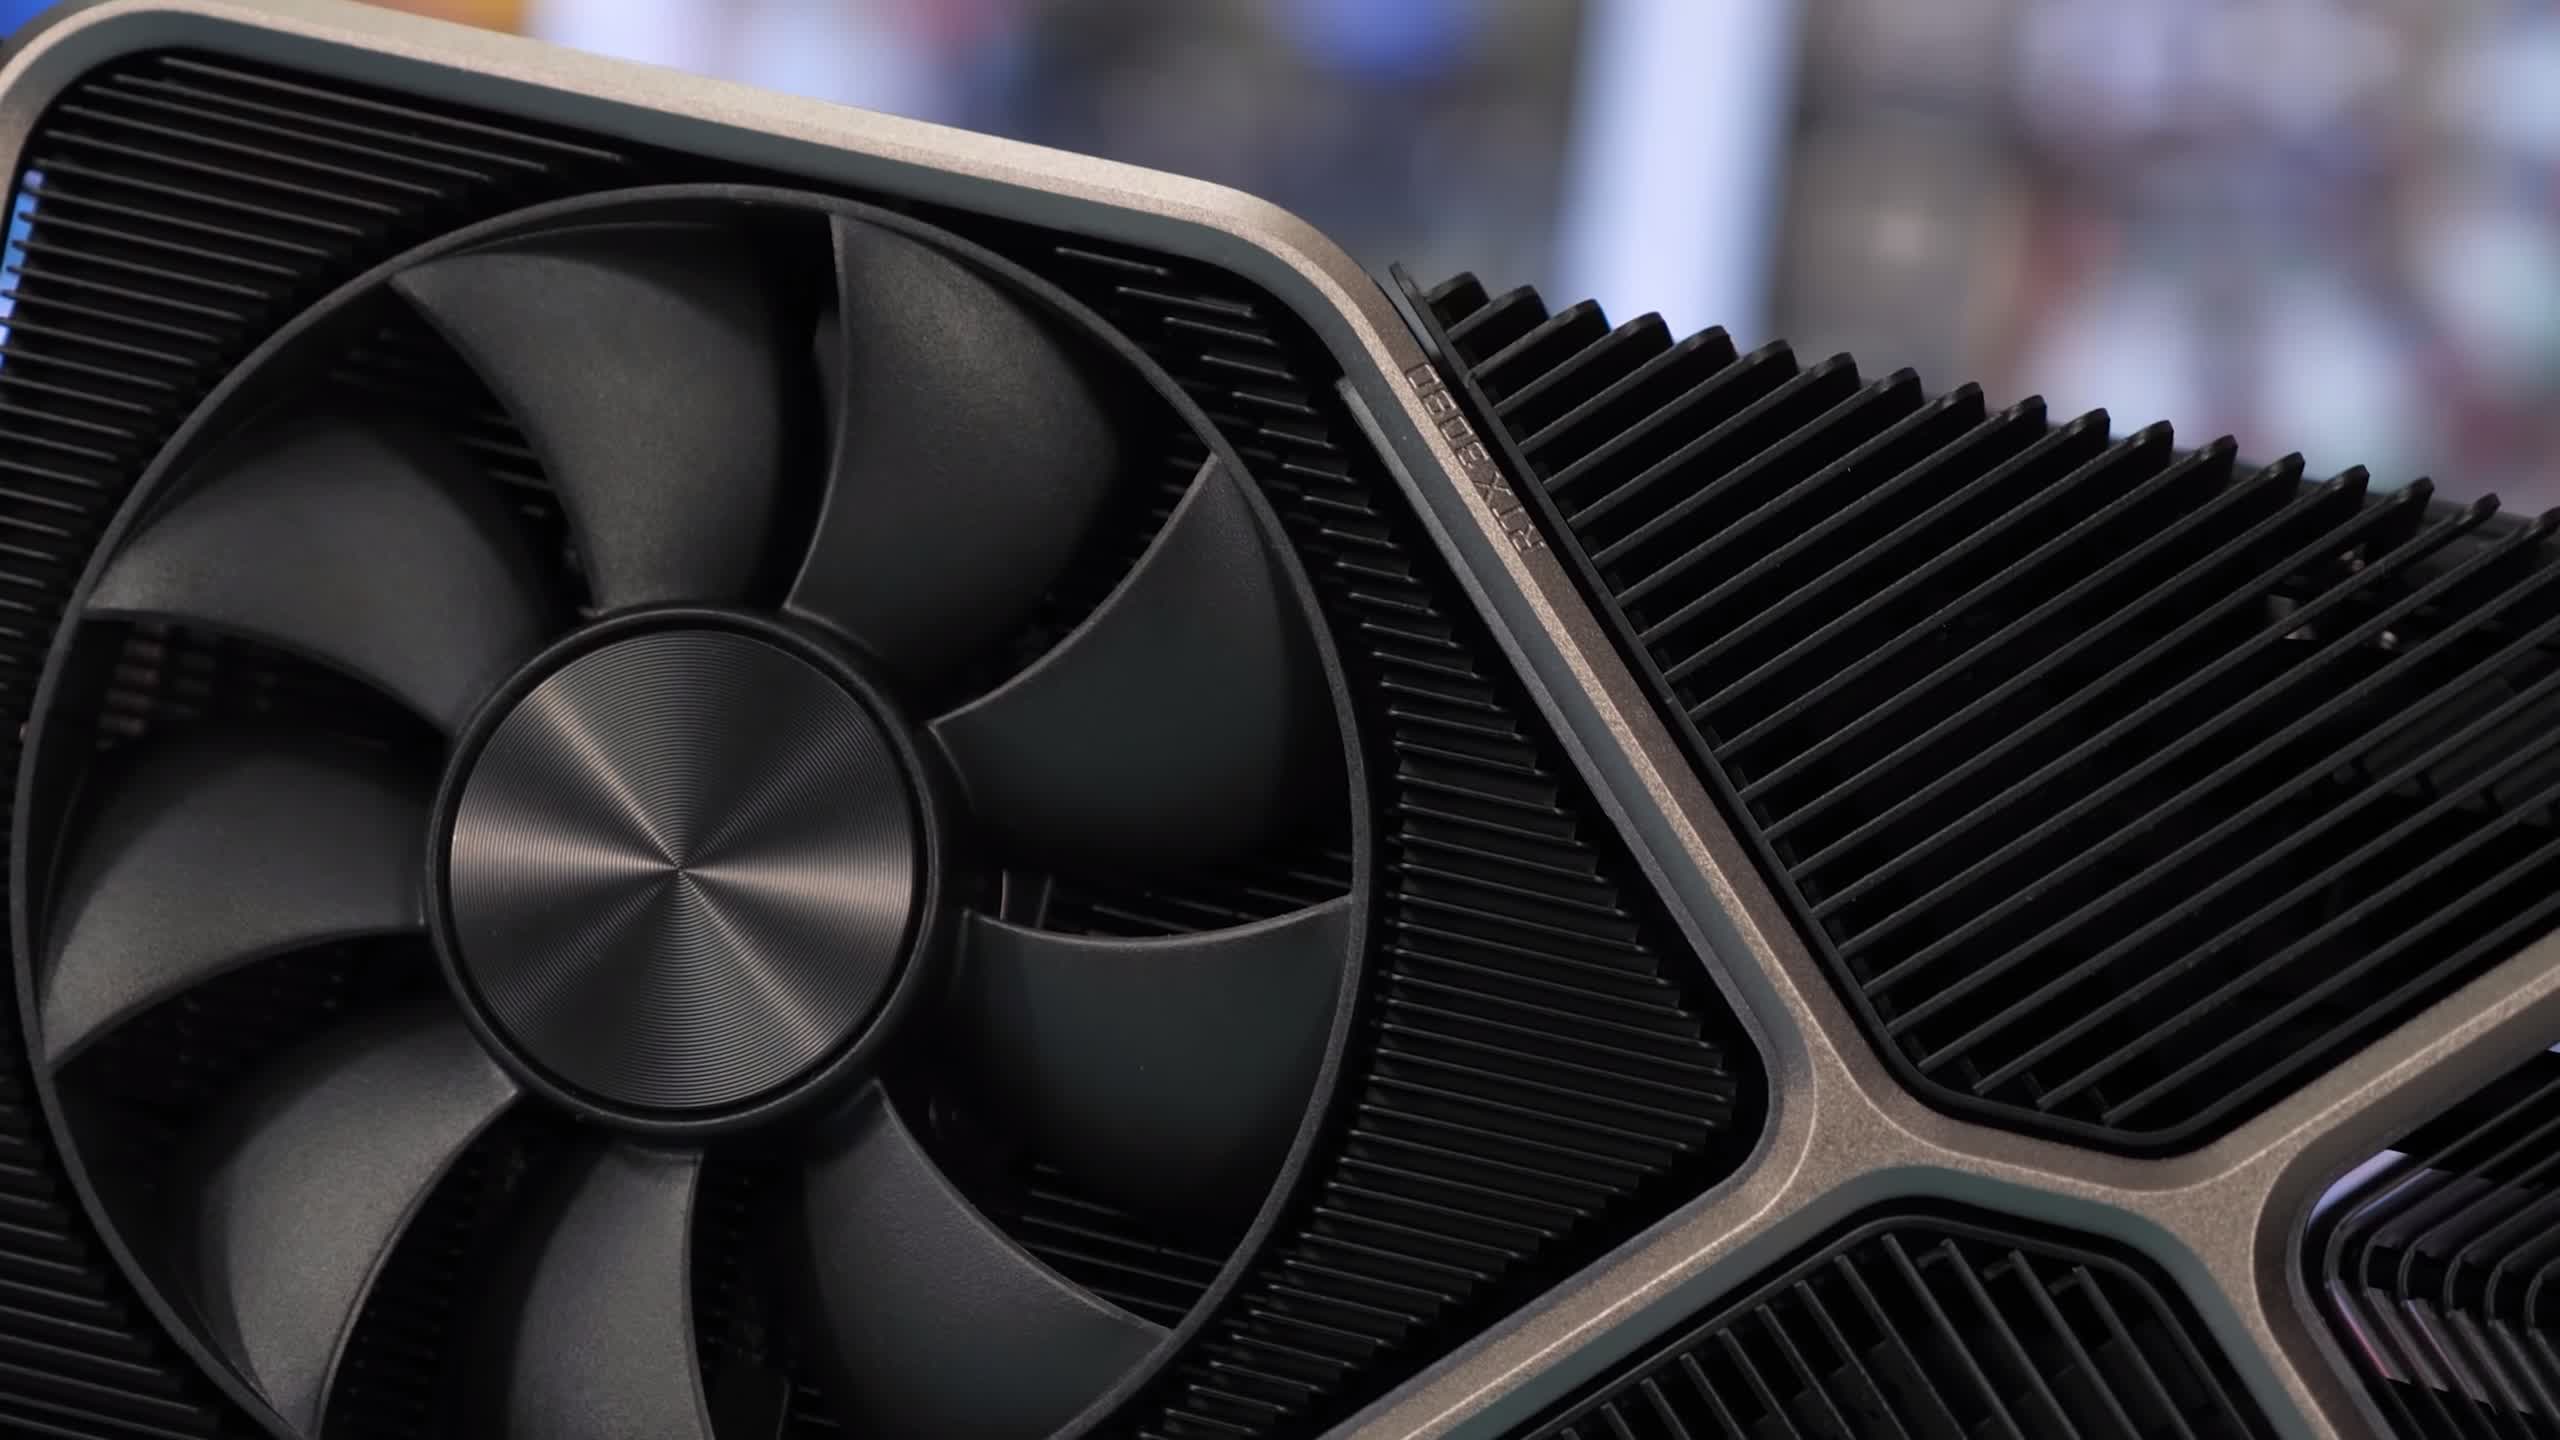 Nvidia RTX 3080 Gaming Performance at 1440p: CPU or Architecture Bottleneck? Photo Gallery